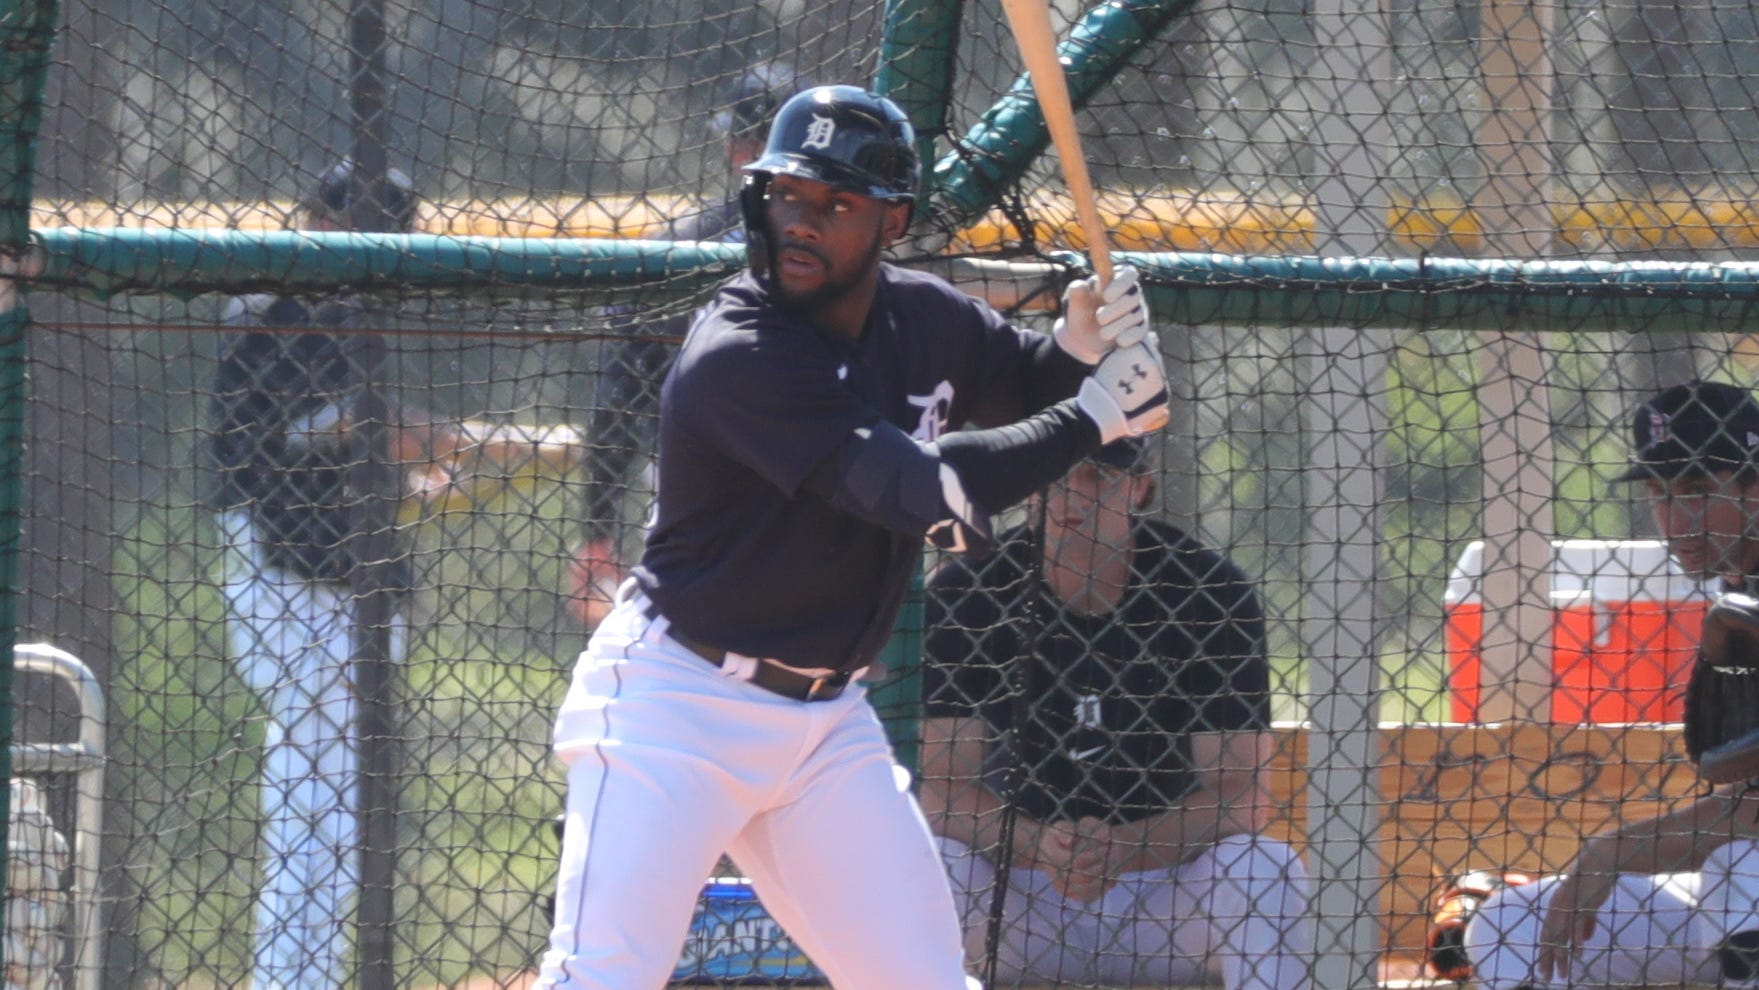 Detroit Tigers outfielder Akil Baddoo takes batting practice Tuesday, Feb. 23, 2021, on the Tiger Town practice fields at Joker Marchant Stadium in Lakeland, Florida.